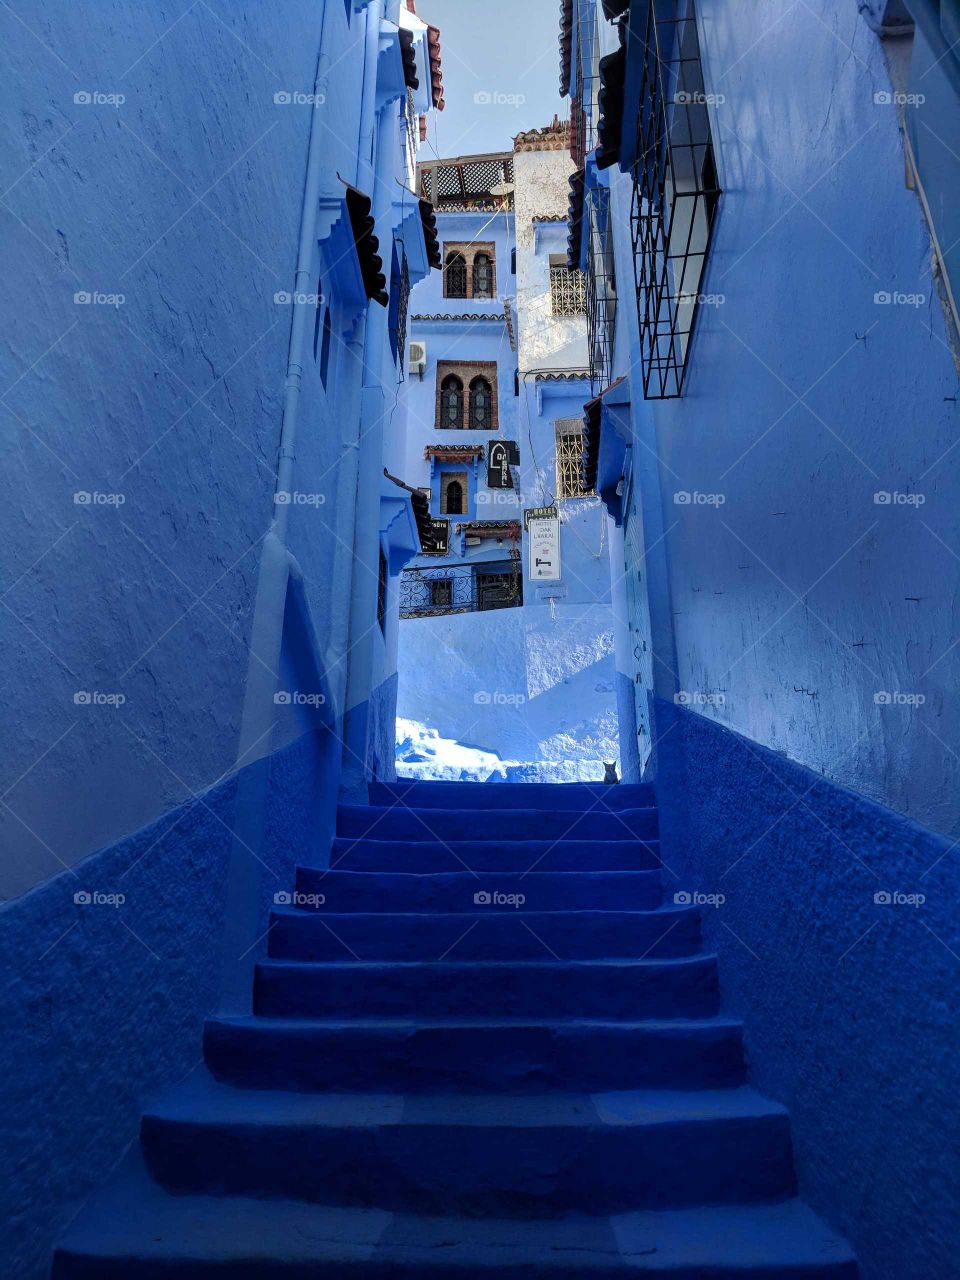 Blue street/alley in Chefchaouen (Blue City) in the mountains of Morocco, flowerboxes and stairs and windows